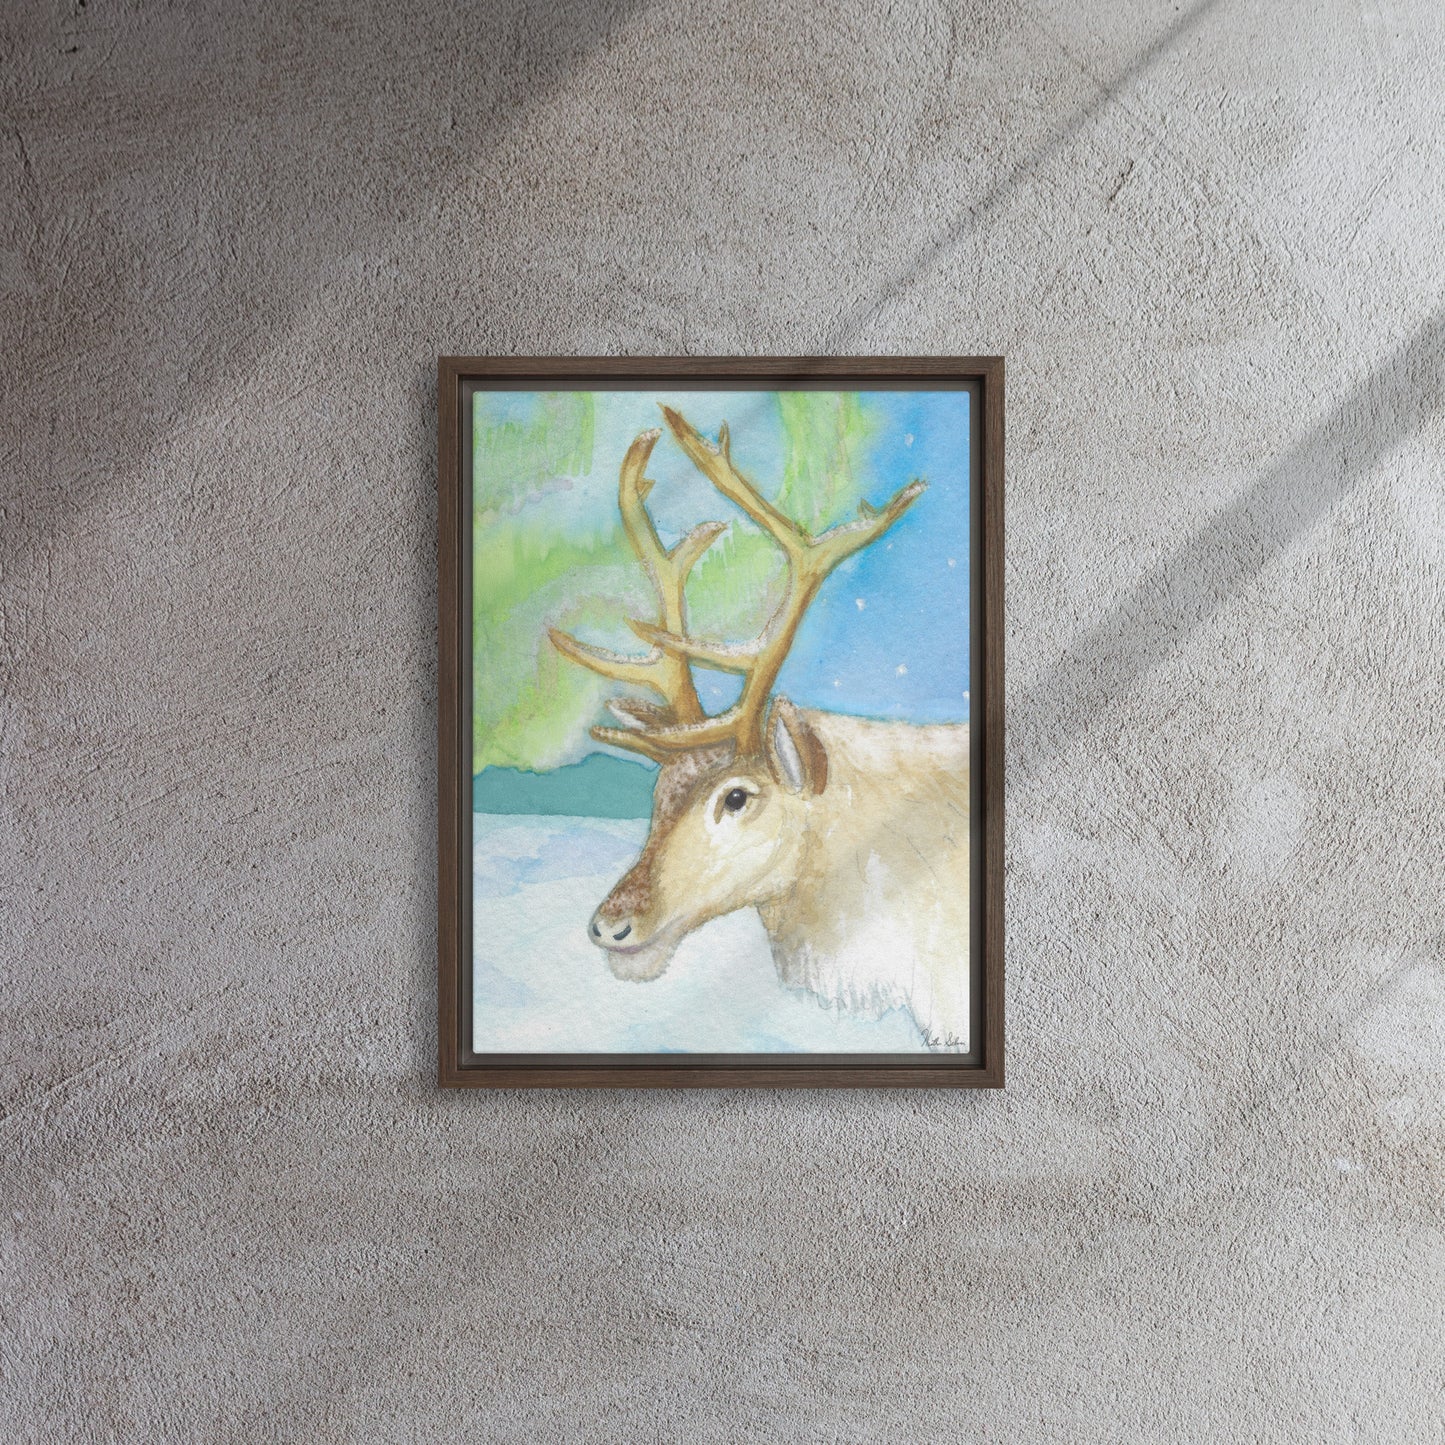 12 by 16 inch framed canvas art print of Heather Silver's Northern Lights Reindeer.  Canvas print mounted in a brown pine frame. Hanging hardware included. Shown on carpet with natural lighting.